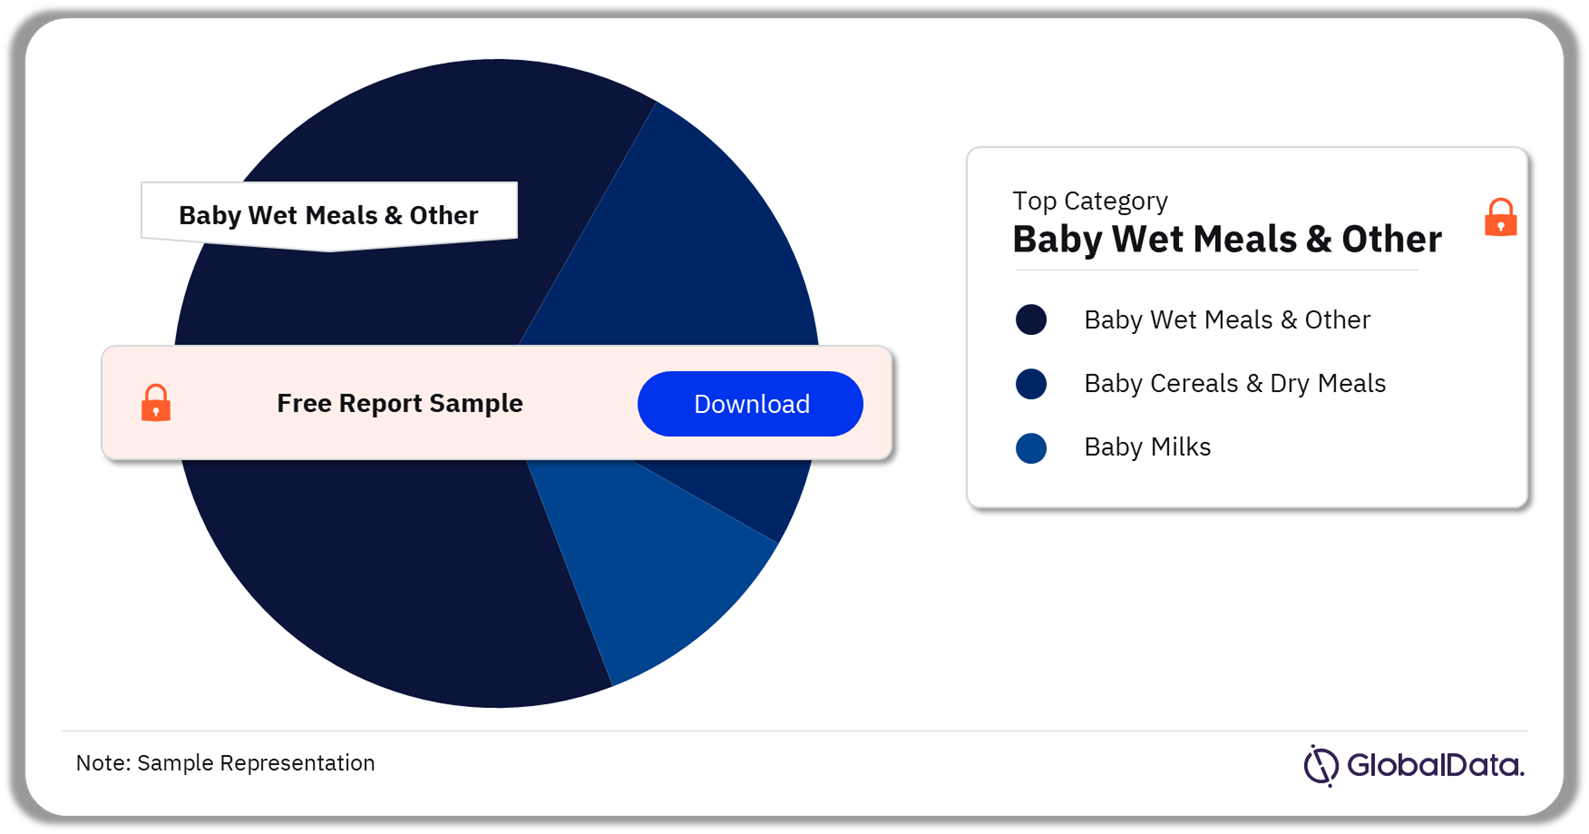 Baby wet meals & other was the leading baby food category in Finland in 2022